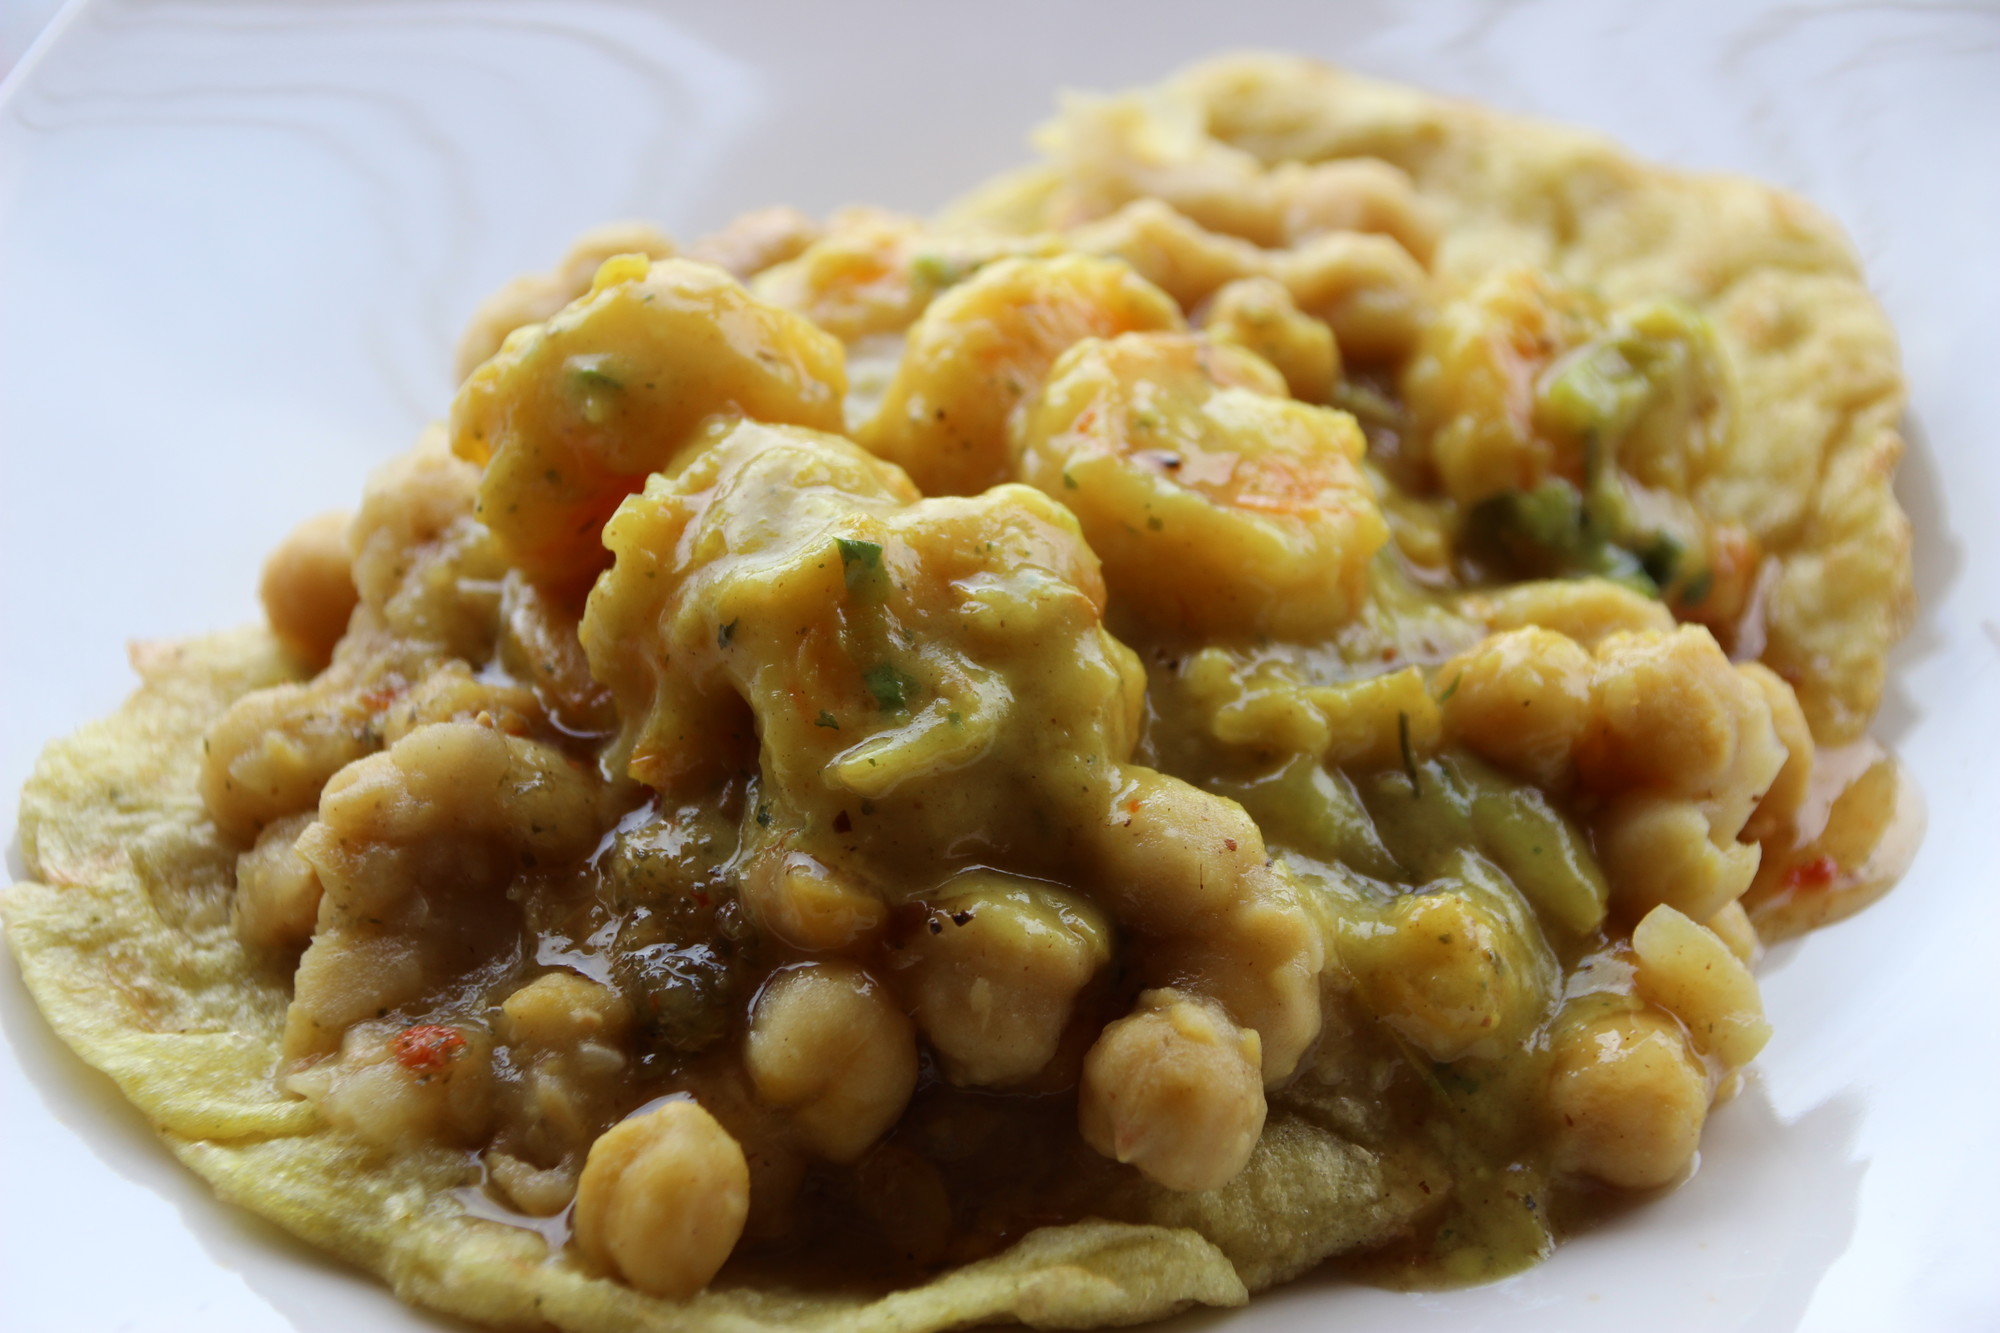 Shrimp doubles, topped with chickpeas and wrapped in a pita, are Ms. B’s take on a classic Trinidadian street food.